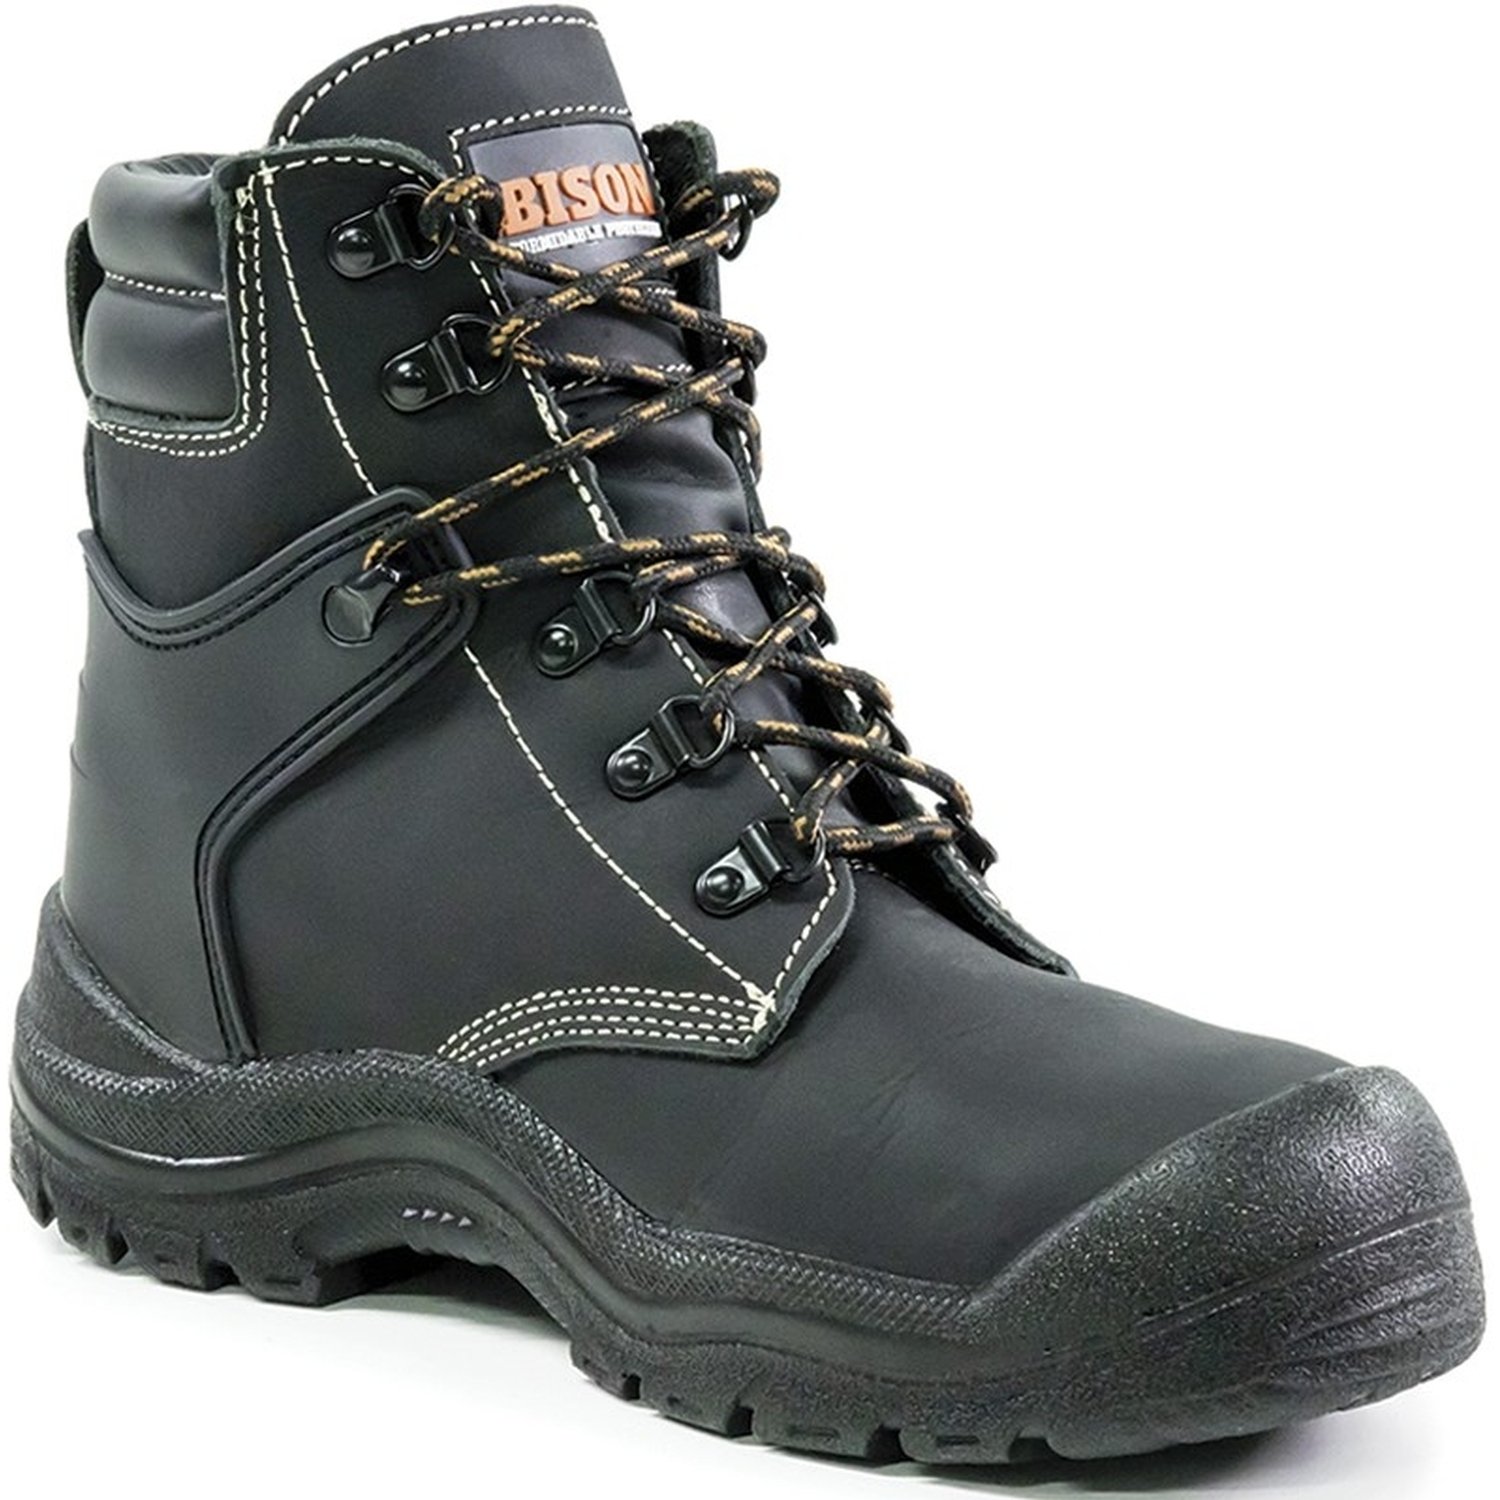 Bison Wolf Steel Toe Lace Up Safety Boot c/w Scuff Cap Black